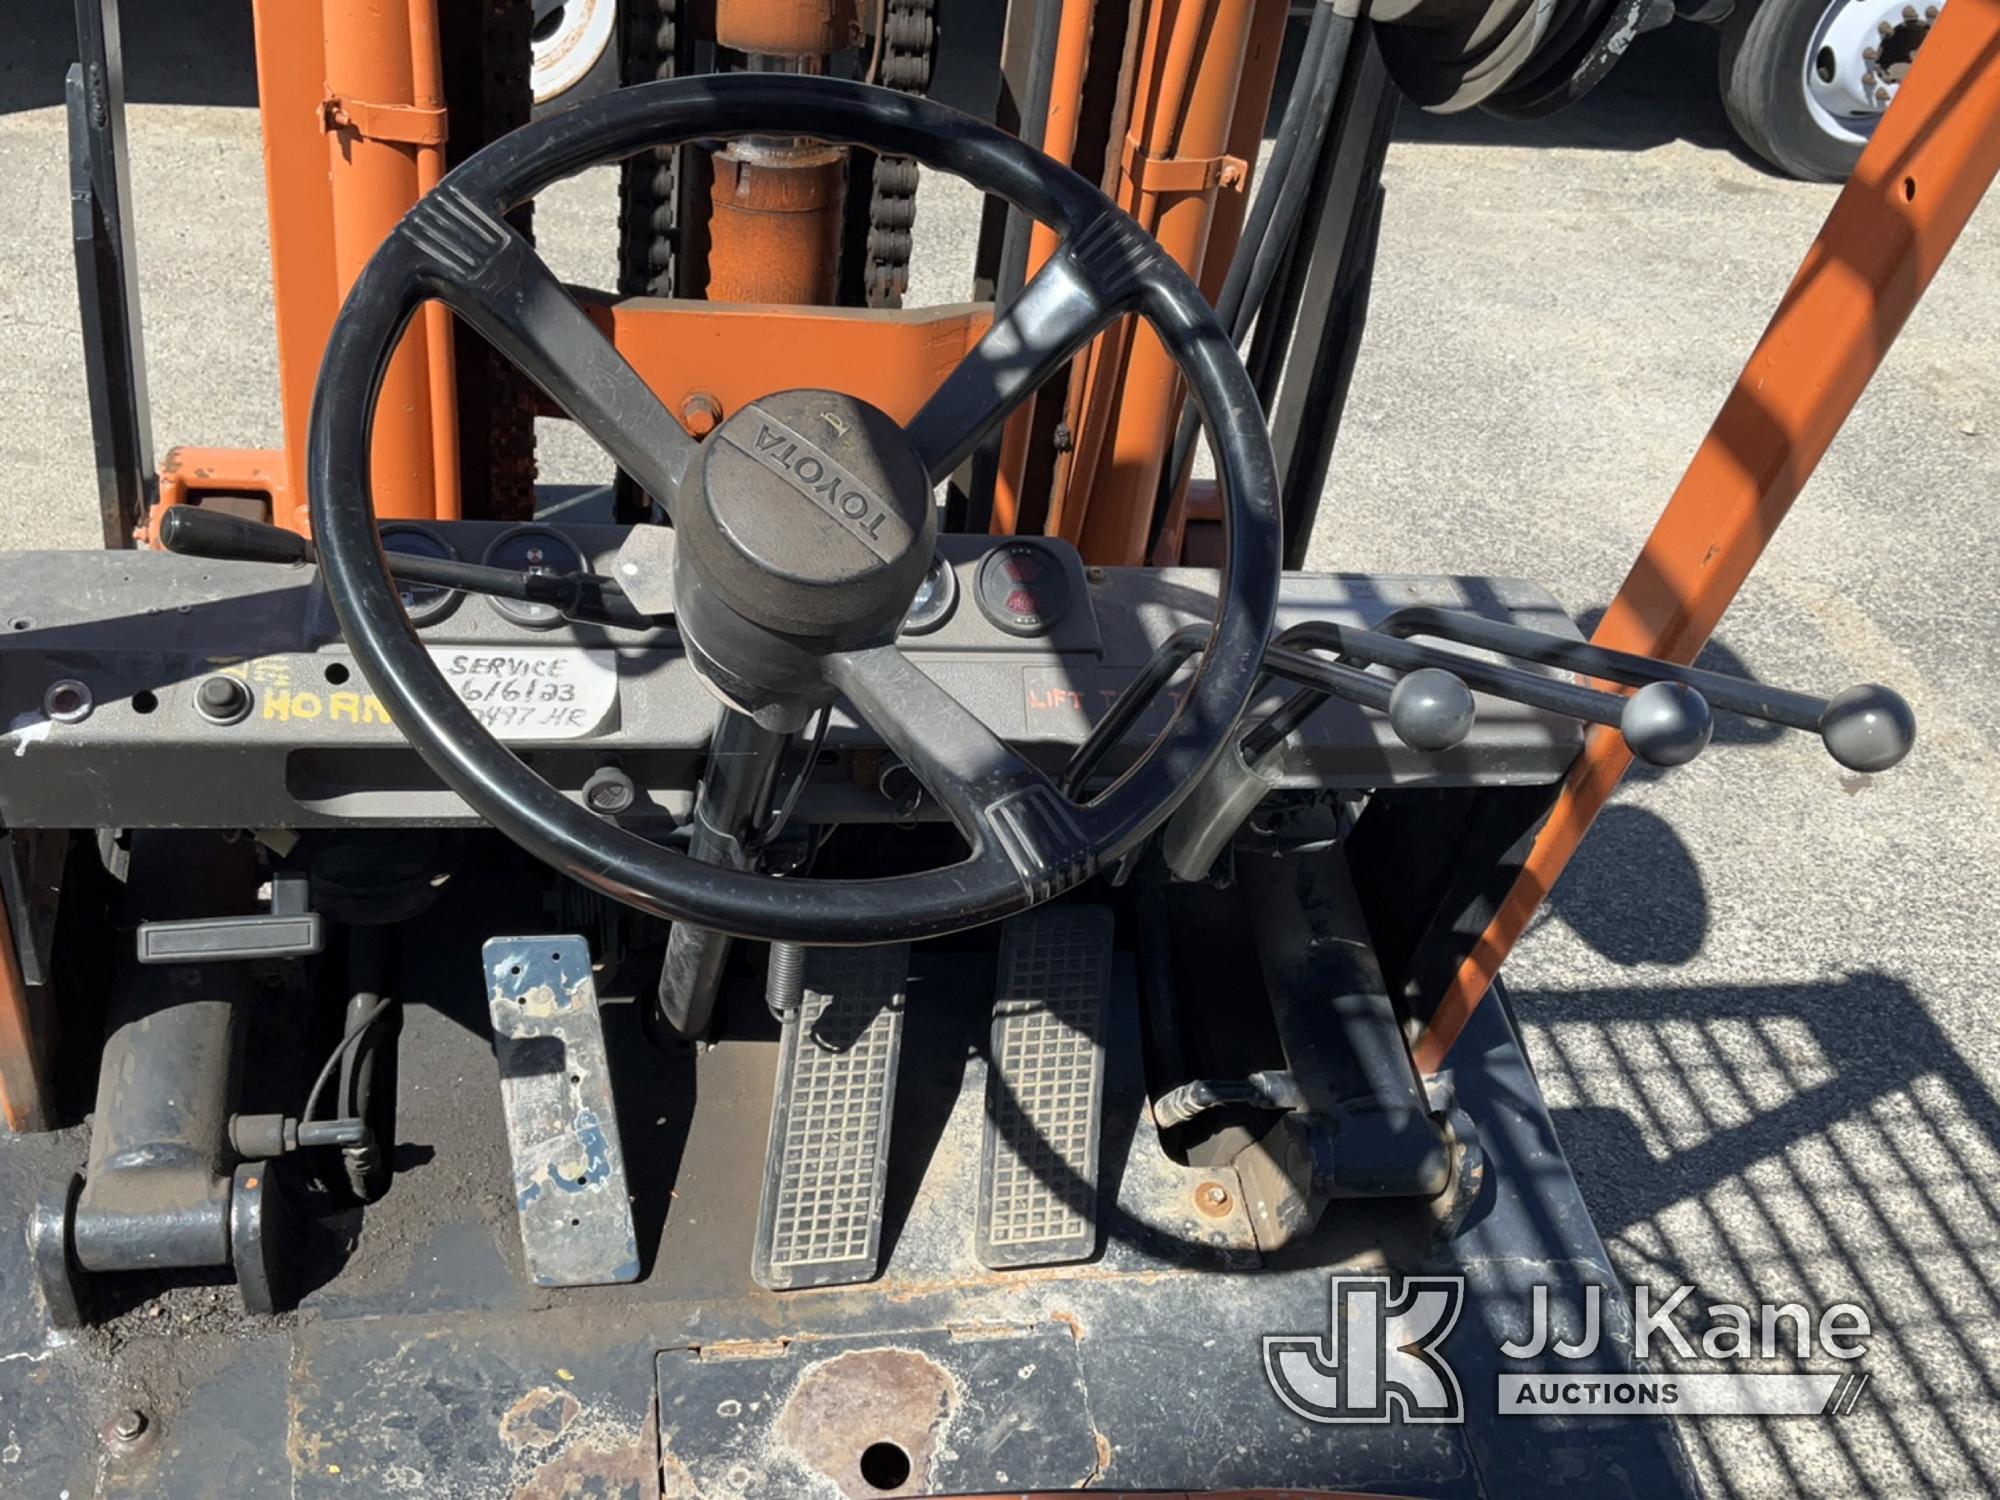 (South Beloit, IL) 1980 Toyota 02-FG30 Solid Tired Forklift Runs, Moves, Operates, Jump to Start, LP